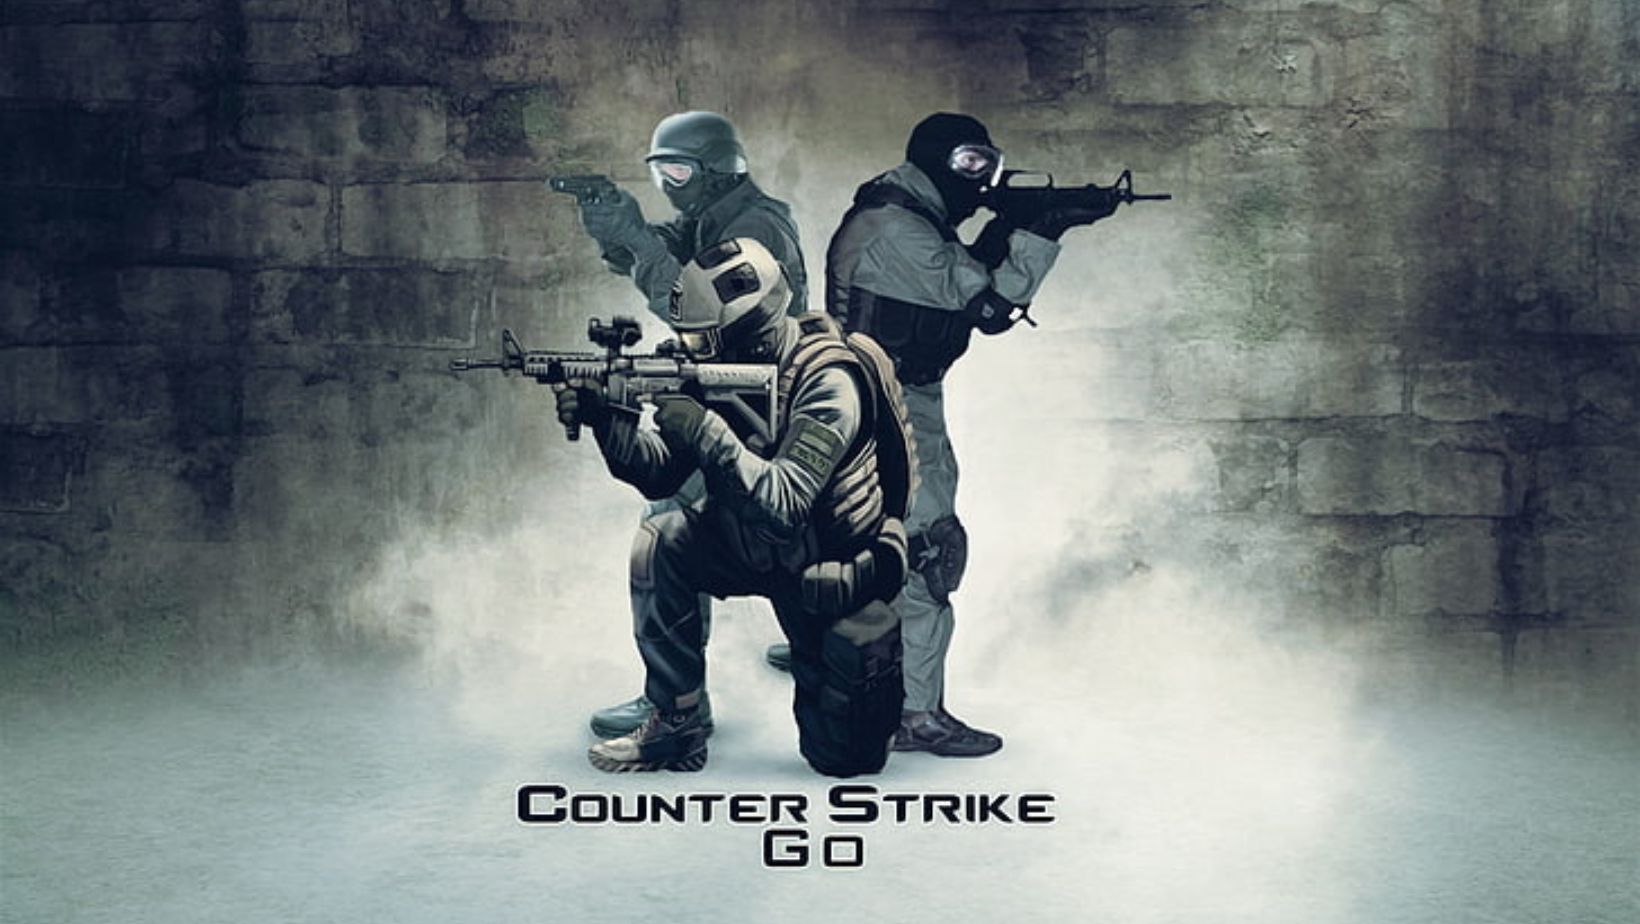 720p counter-strike global offensive images